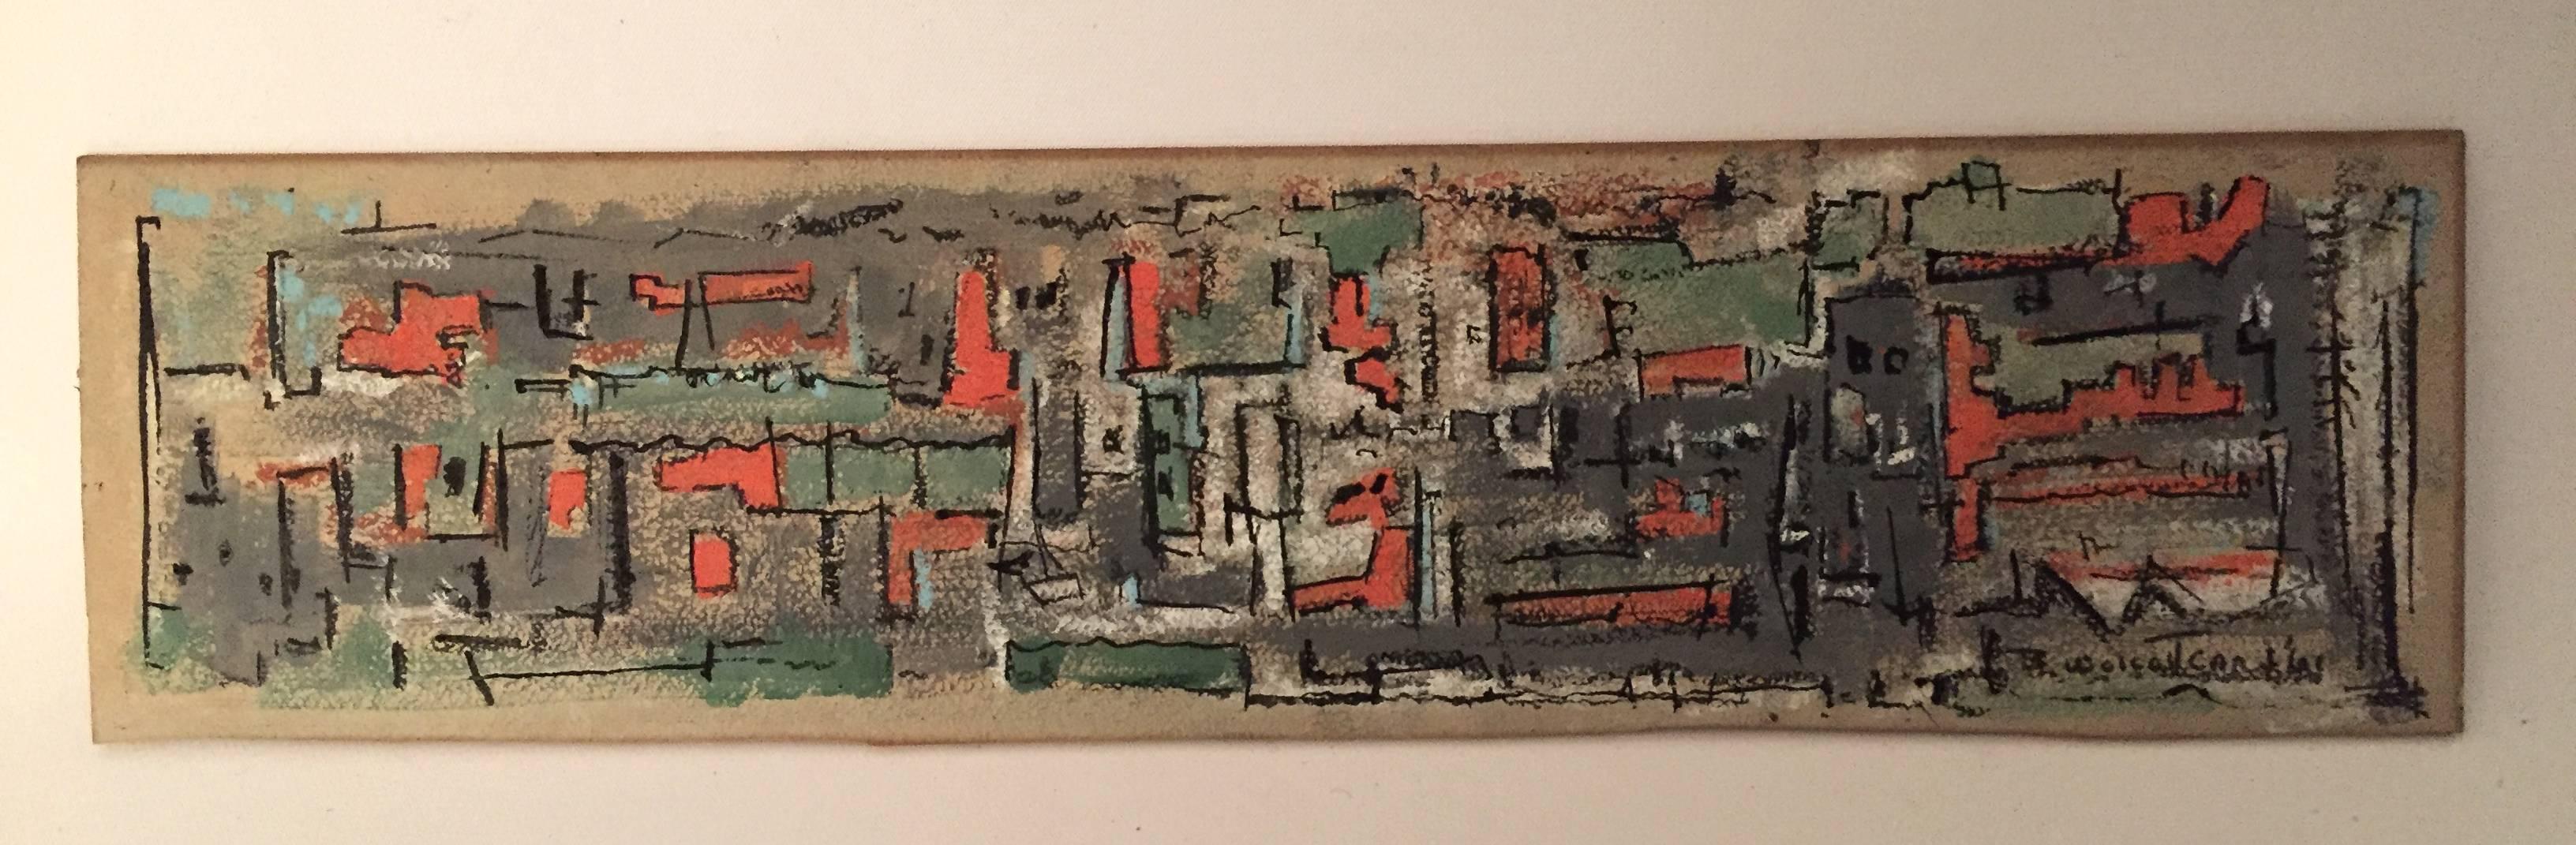 Signed lower right, B. Wolcott Cary, '61. Very nice abstracted panoramic cityscape mixed media. Cary primarily painted in Massachusetts, so this is possibly an old factory town like New Bedford. Gouache or watercolor on academy board. Very good,